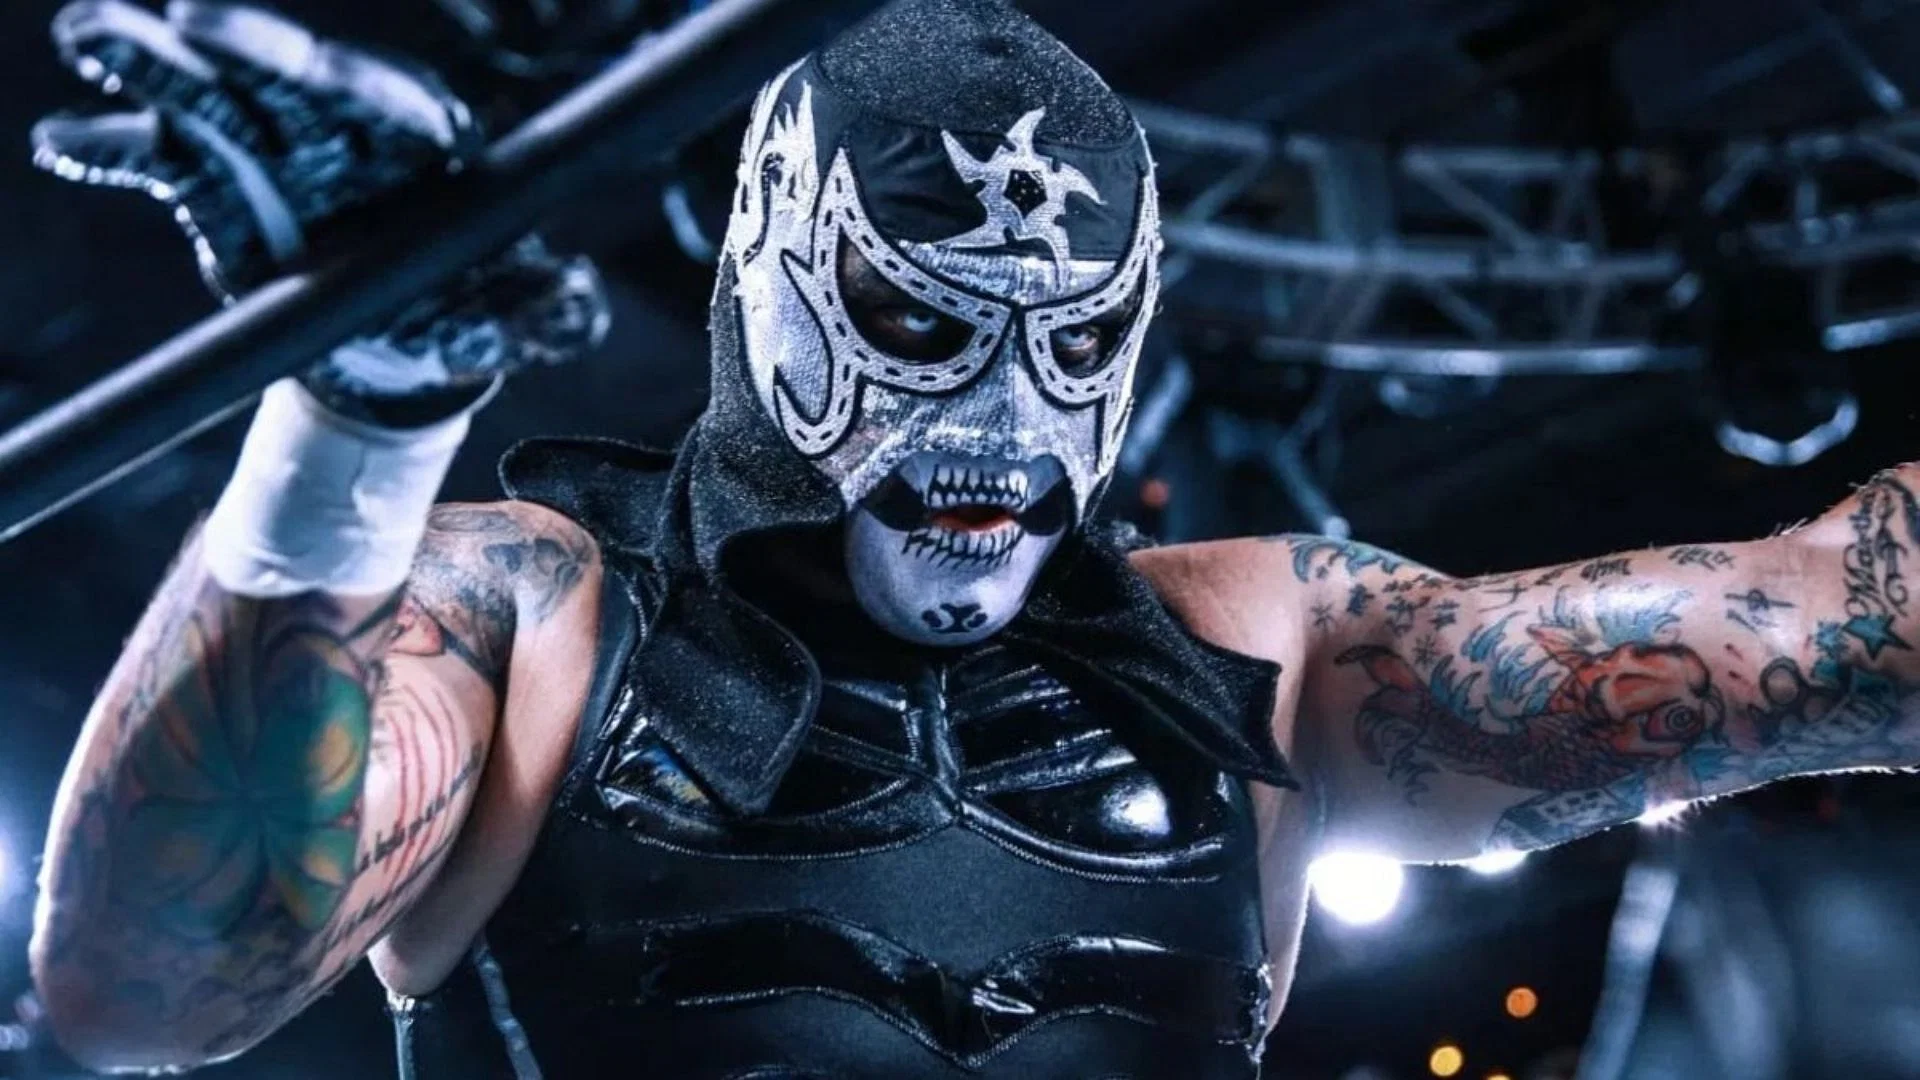 Penta El Zero Miedo is Open to the Possibility of Joining WWE once His AEW Contract Ends.